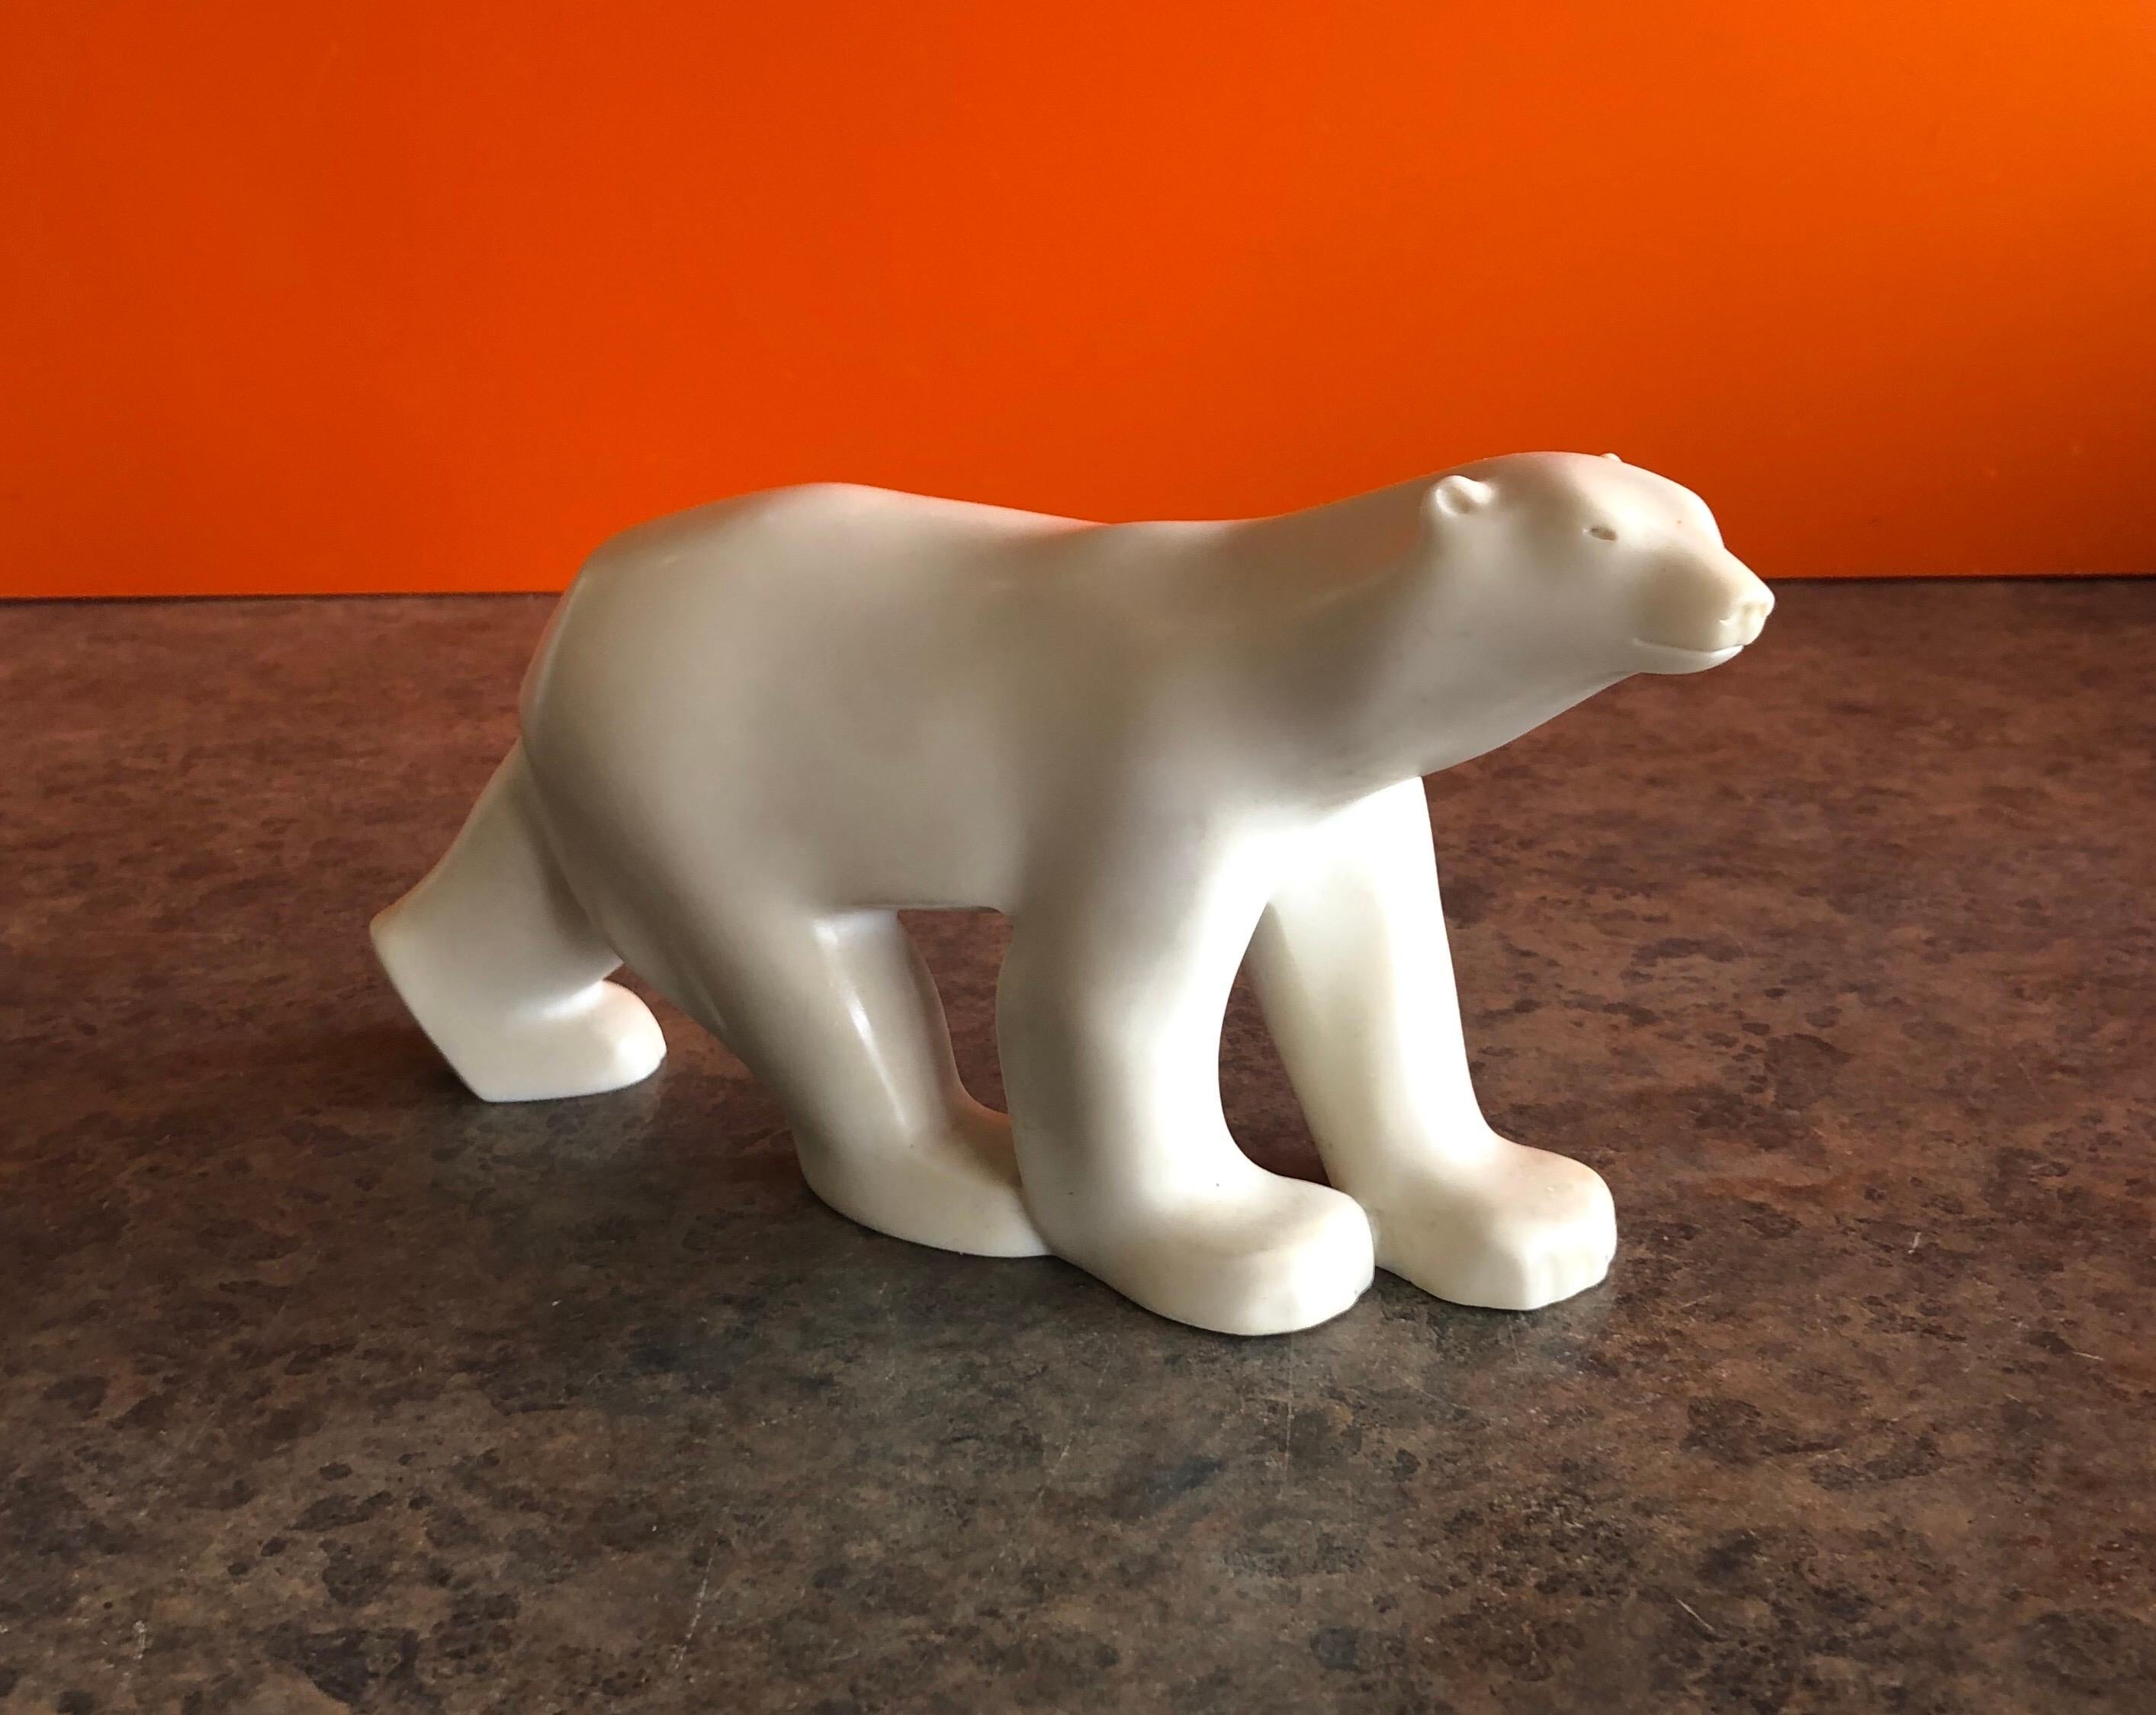 Cast resin polar bear sculpture by Francois Pompon for the MOMA Collection, circa 1984. The piece is a minature reproduction of the famous work by Pompon and is stamped 